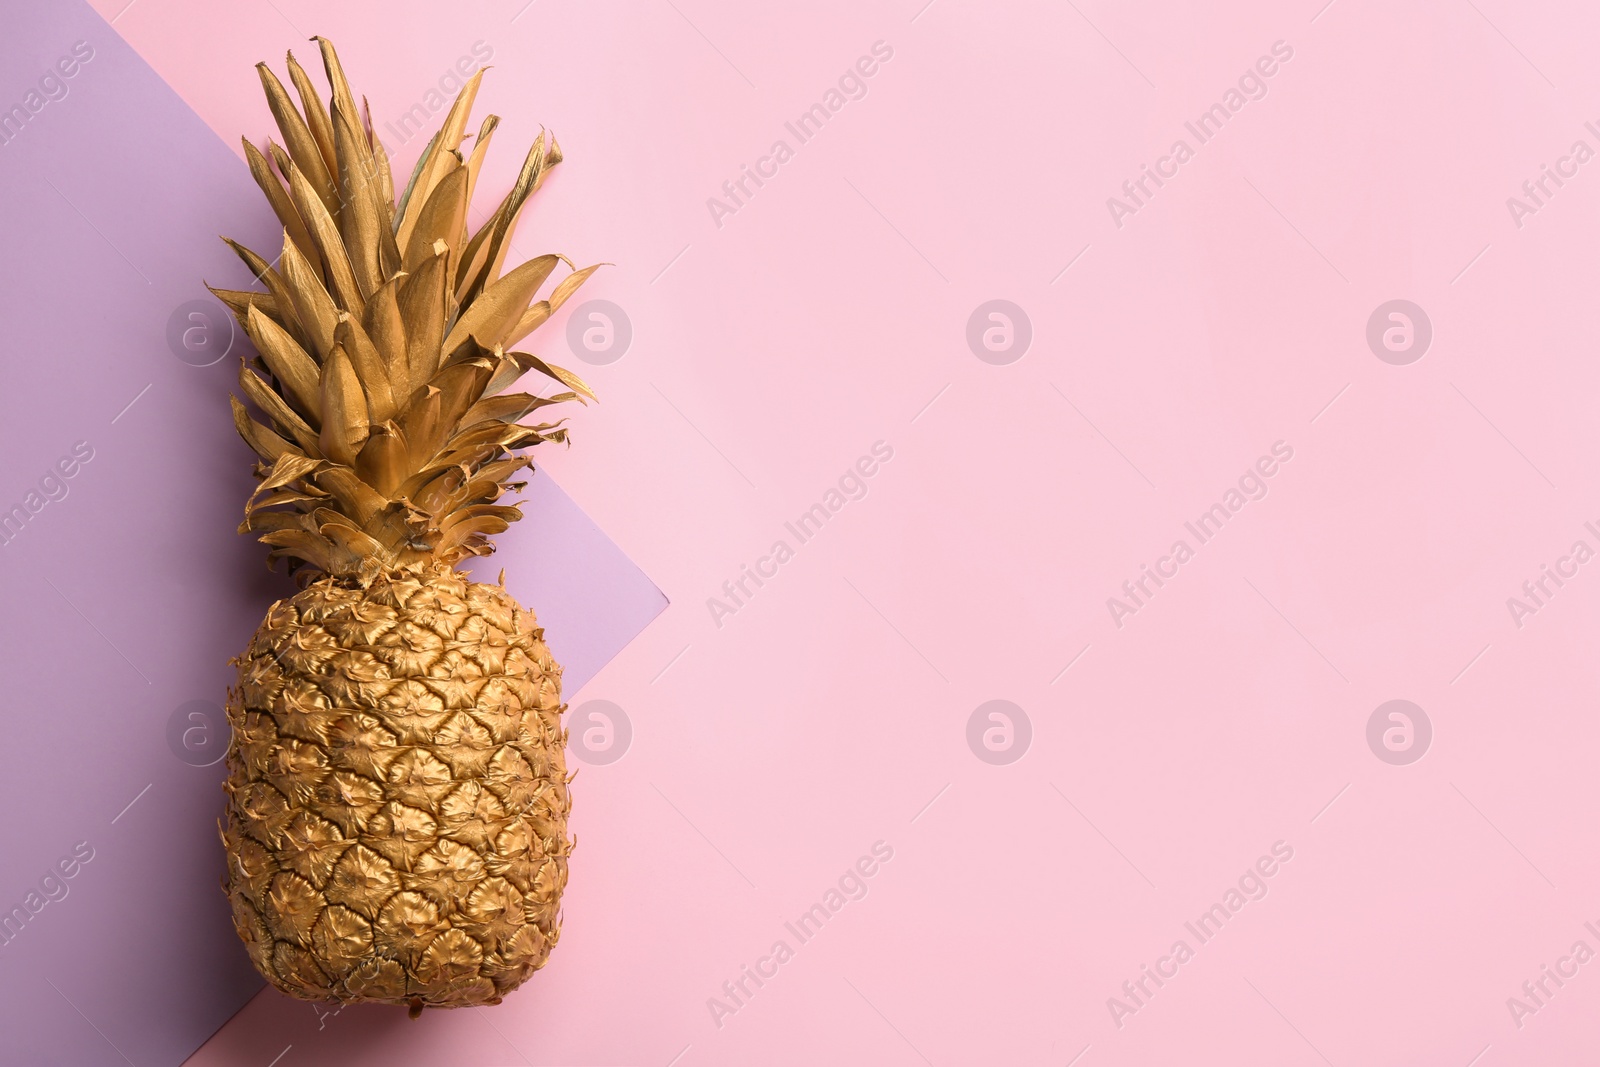 Photo of Golden pineapple on color background, top view with space for text. Creative concept